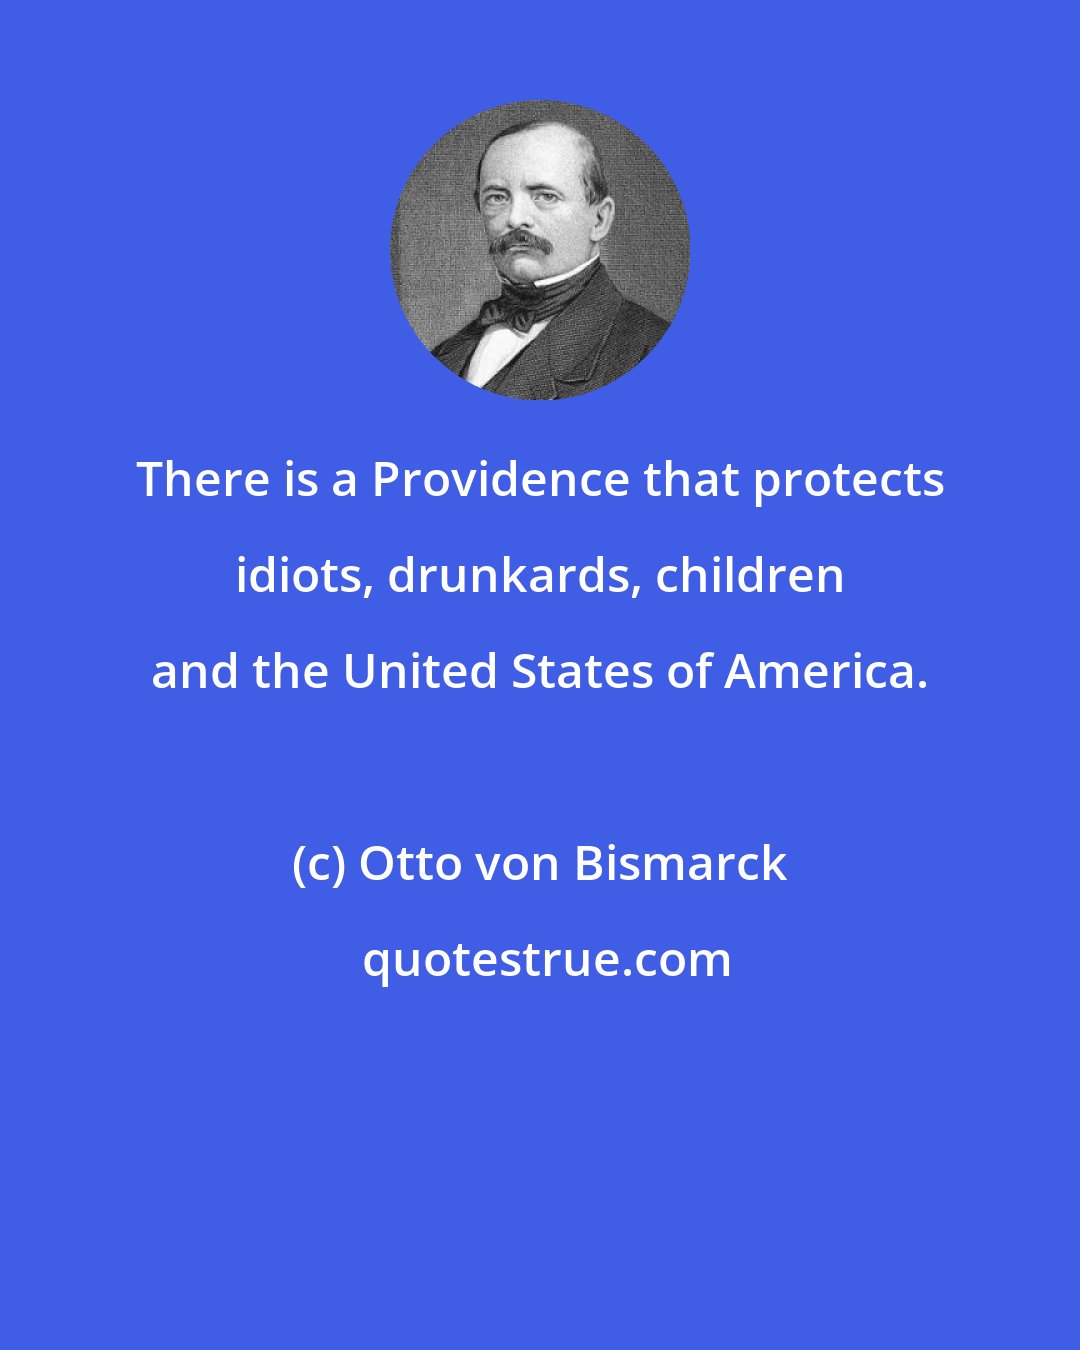 Otto von Bismarck: There is a Providence that protects idiots, drunkards, children and the United States of America.